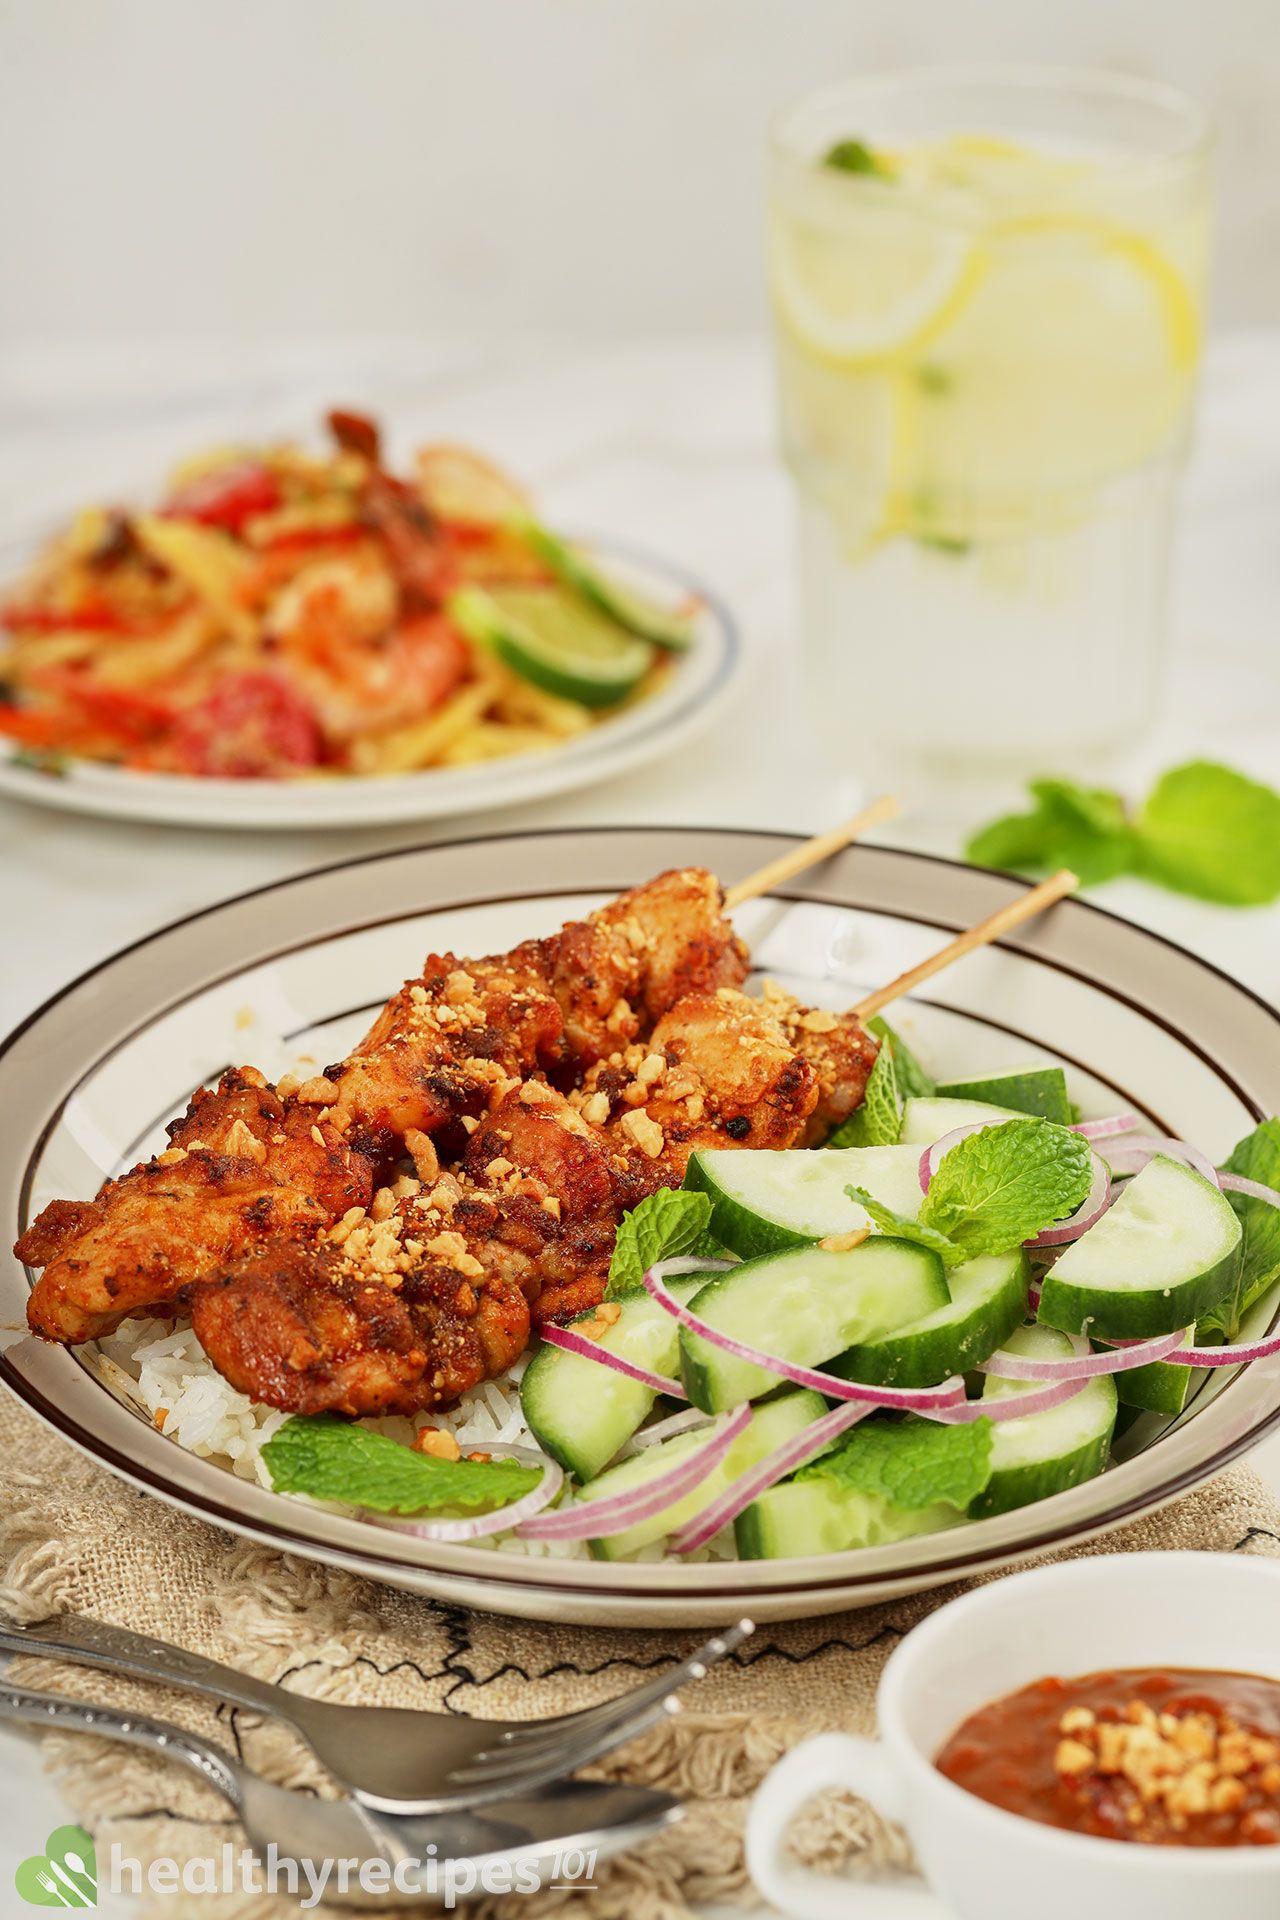 What to Serve With Chicken Satay